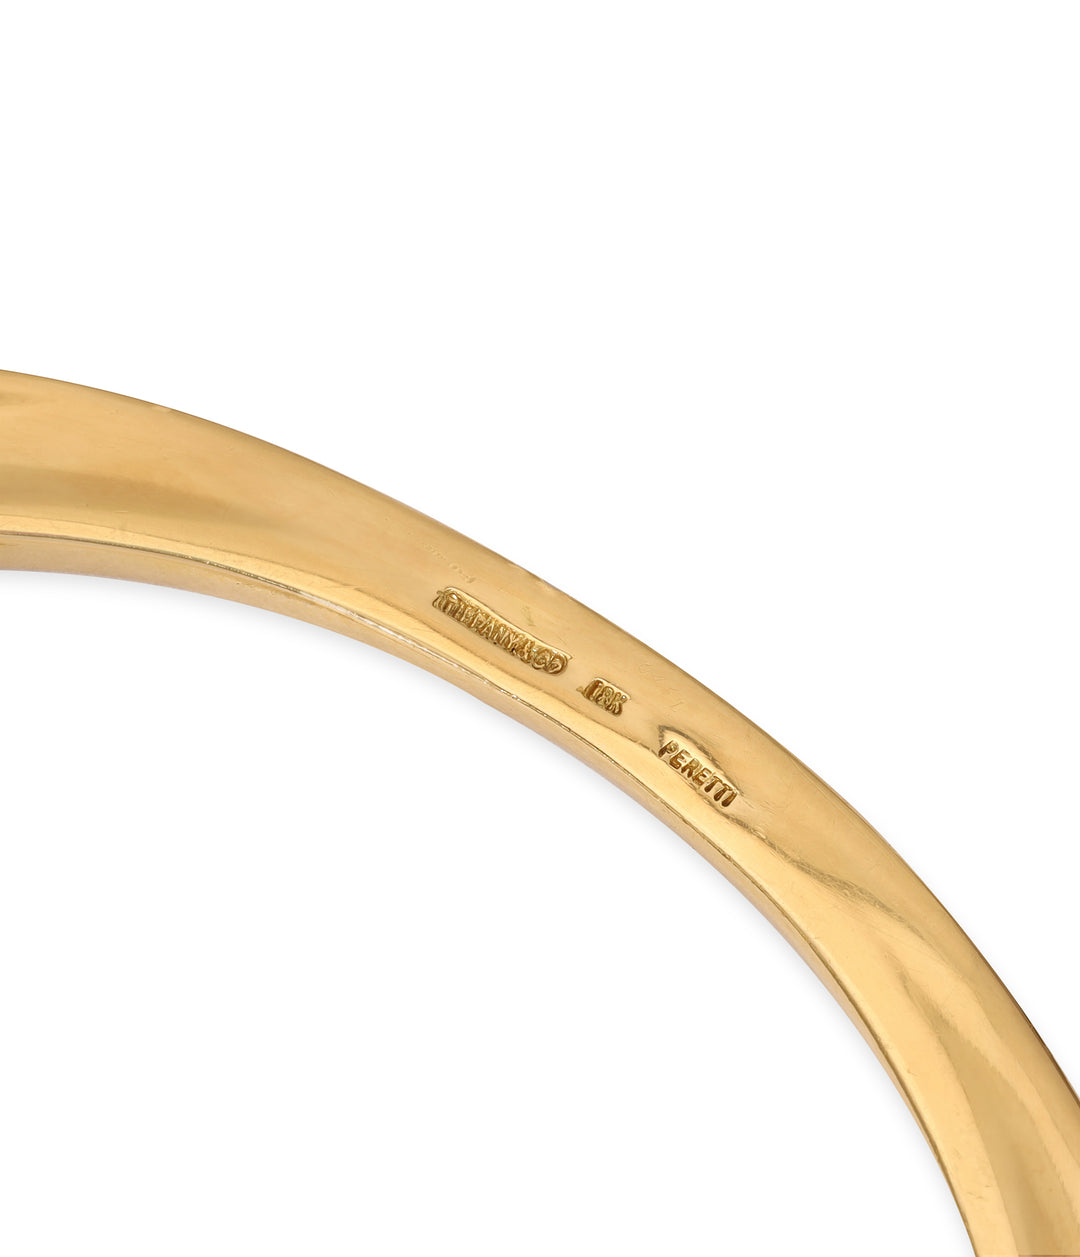 Tiffany & Co., Elsa Peretti 'The Flying Saucer' Bangle in 18K Gold